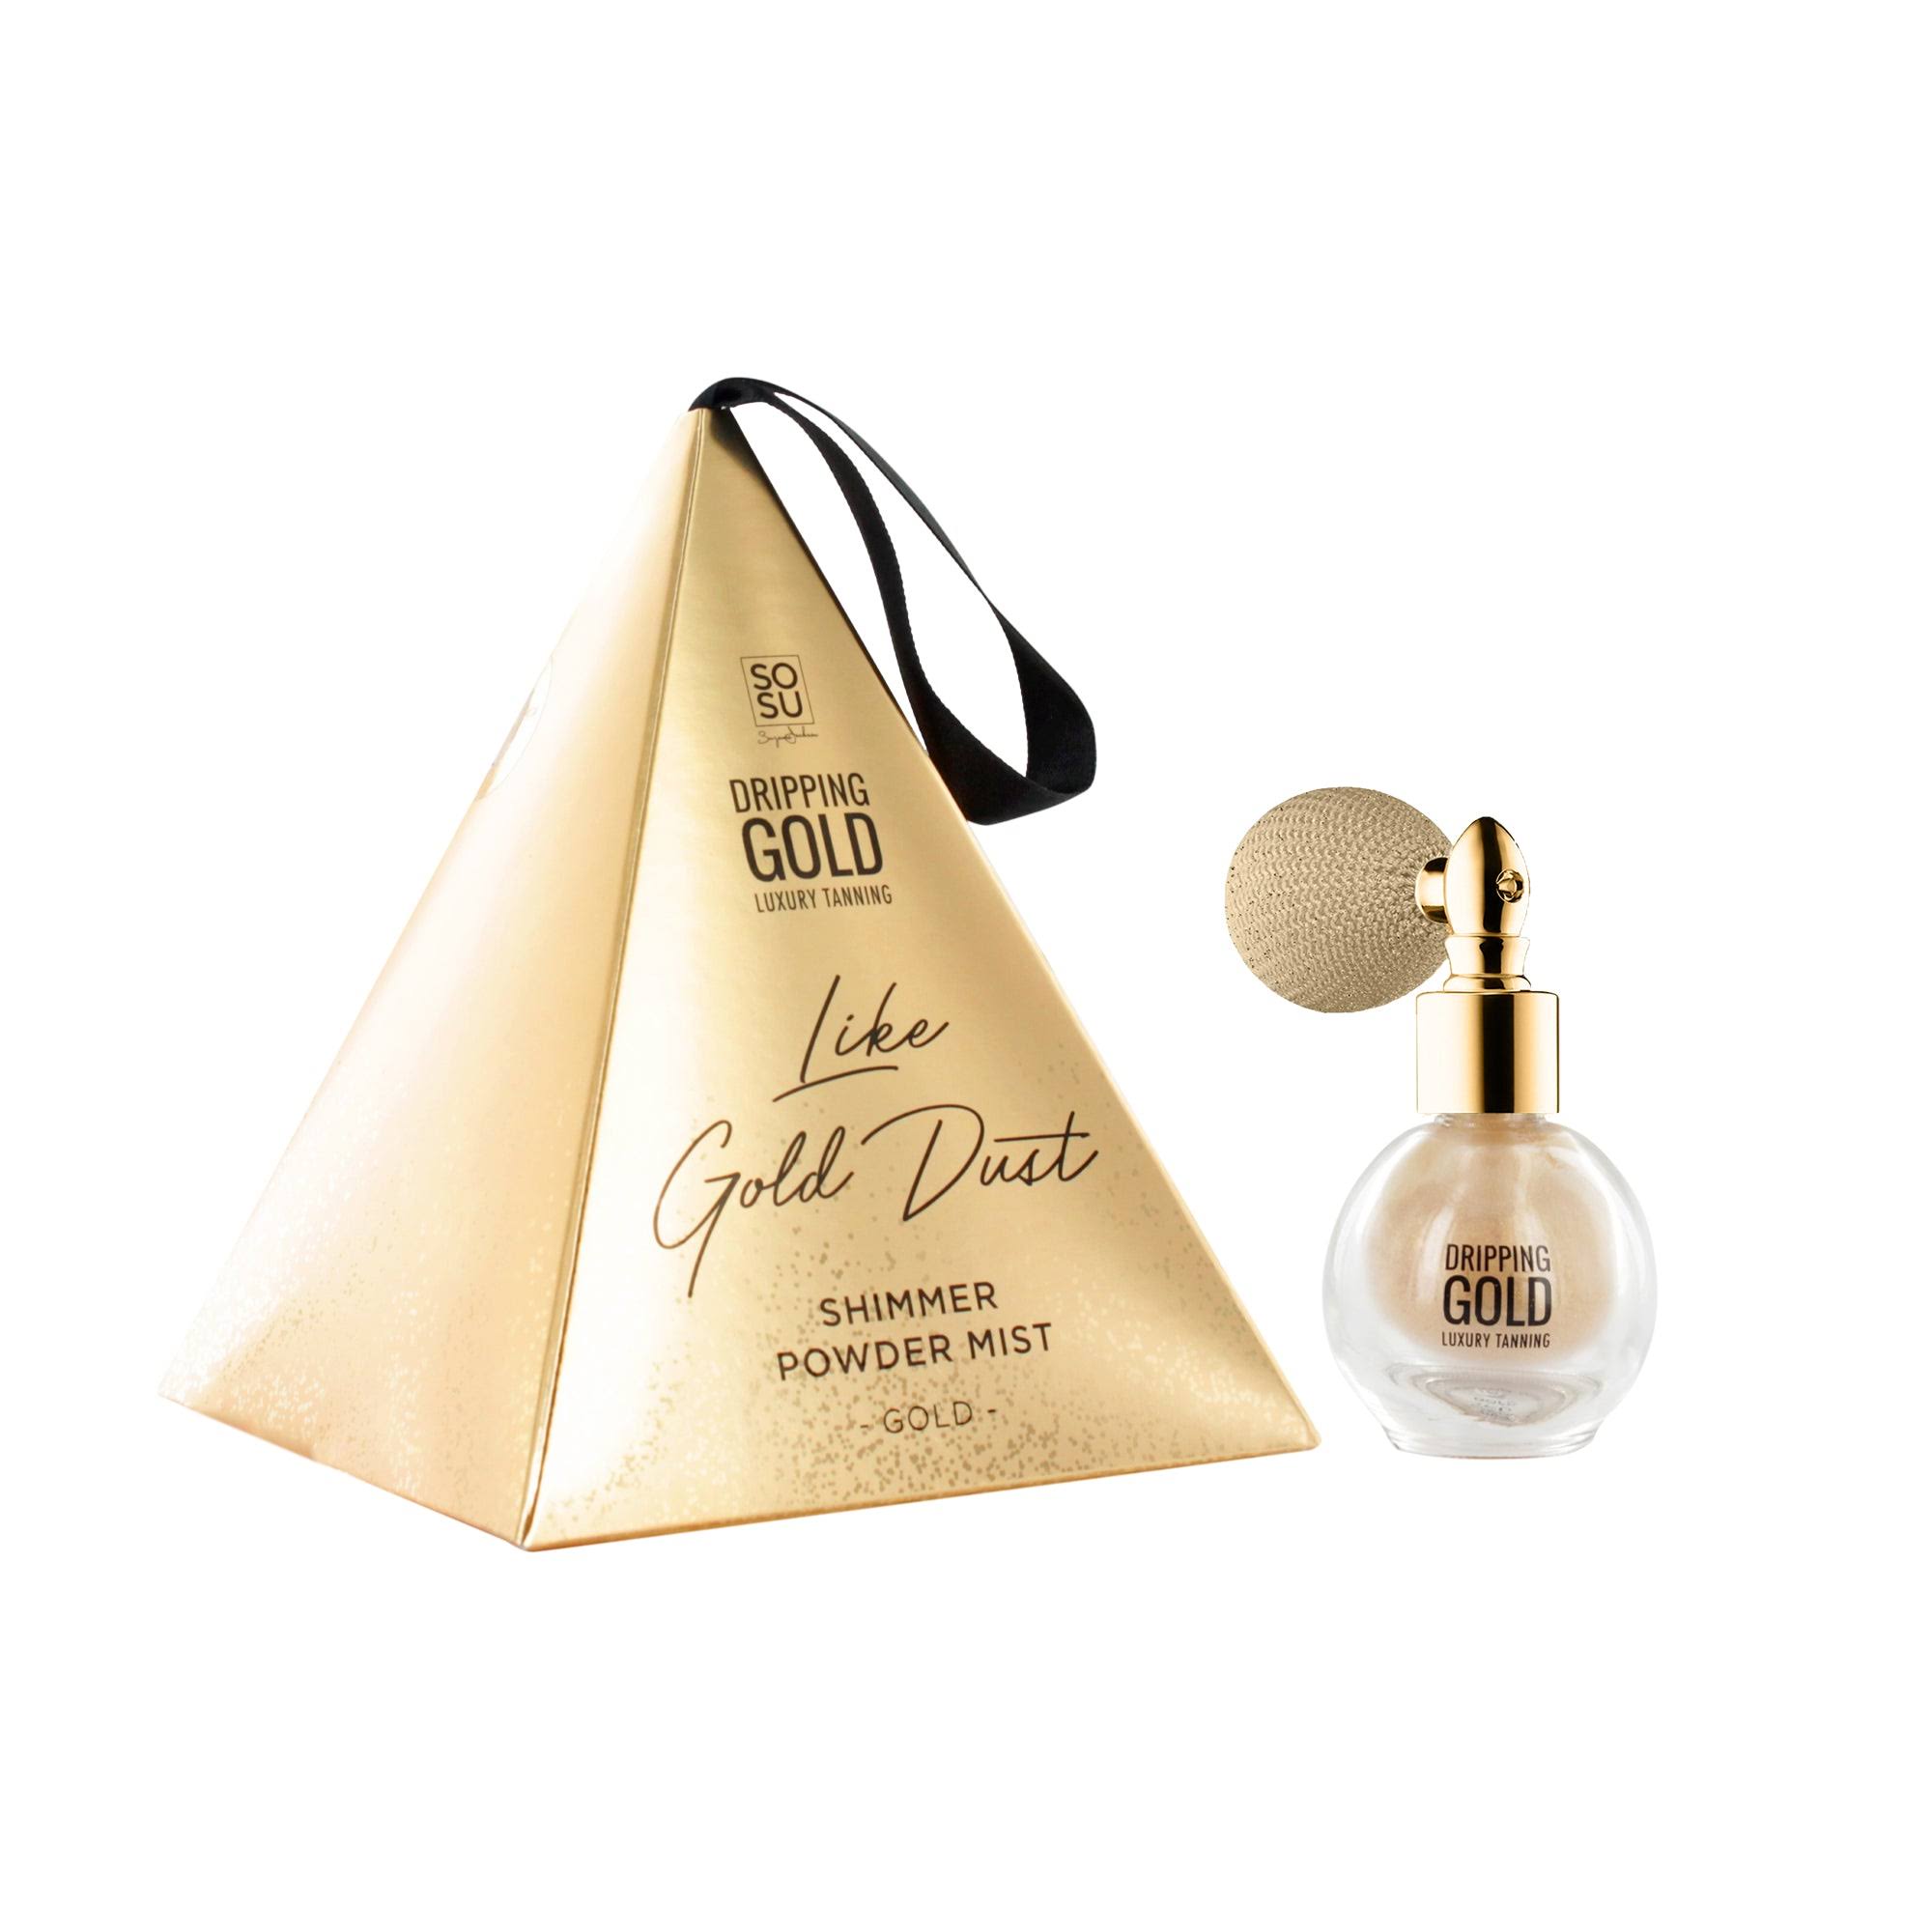 Dripping Gold Like Gold Dust Gift Bauble | Gold